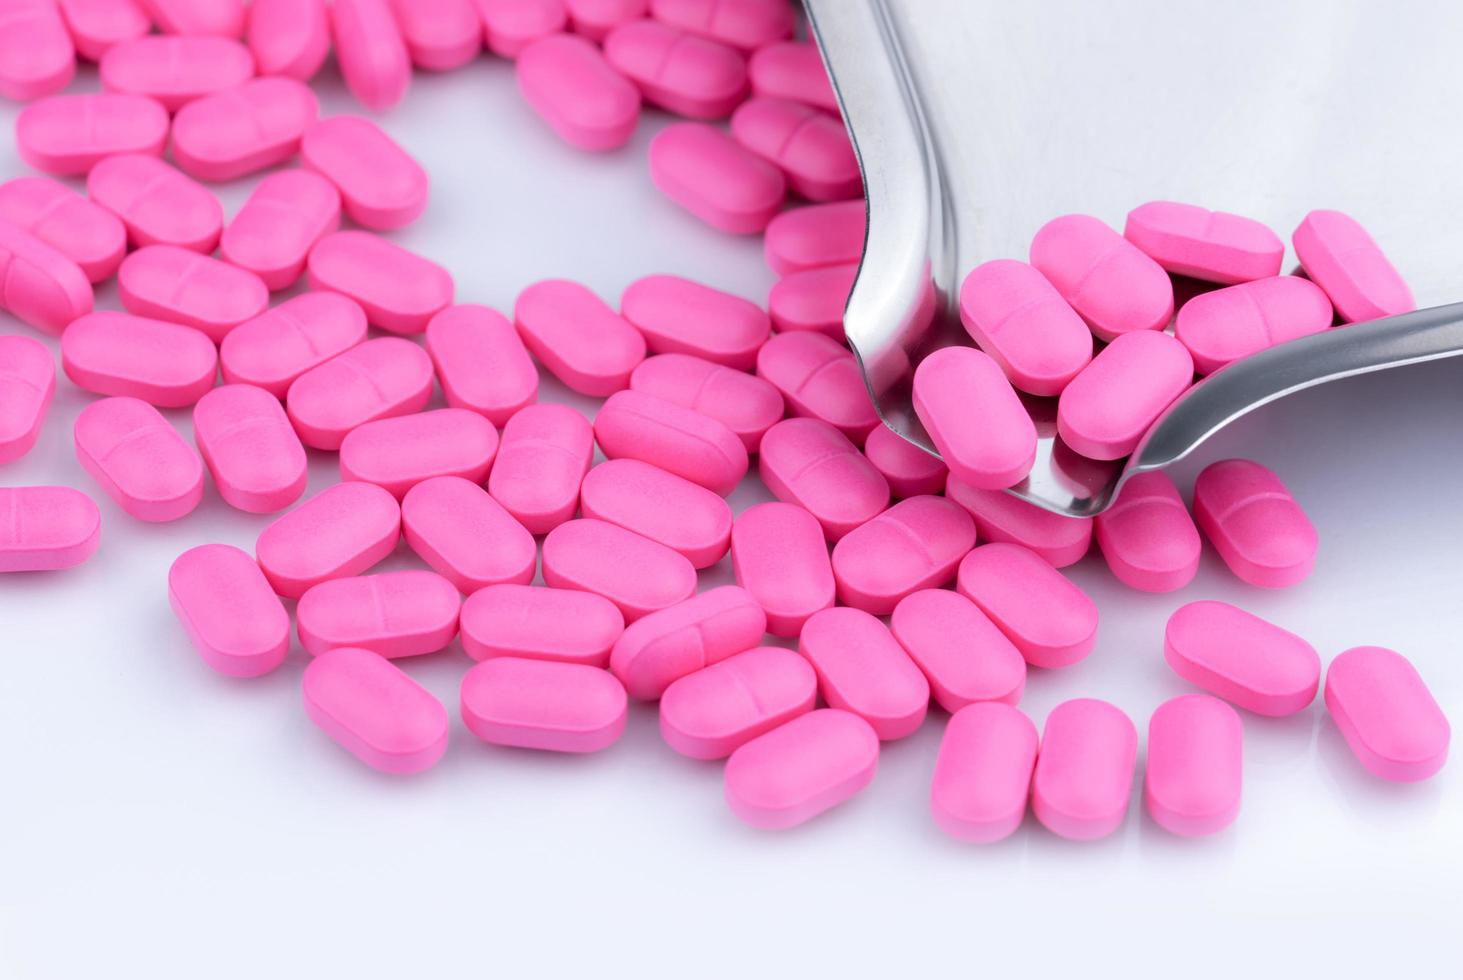 Top view of pink tablets pills on stainless steel drug tray. Pharmaceutical industry. Pharmacy drugstore products. Drug count. Medication use in hospital. Pharmacology. Prescription drugs. Healthcare. photo